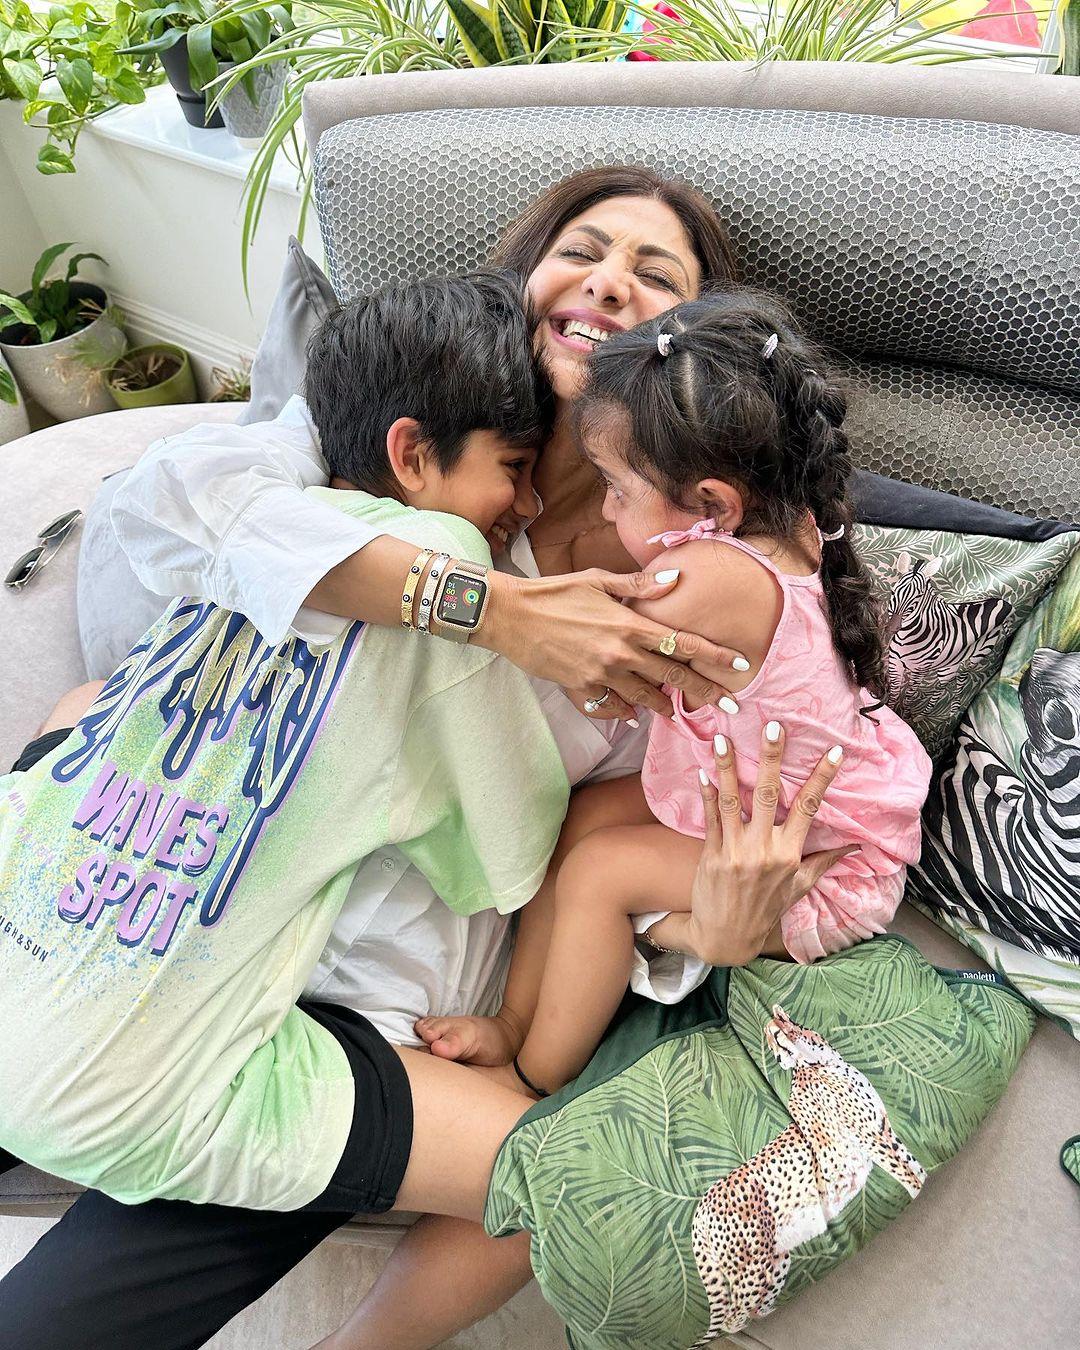 Shilpa Shetty became a mom to her first child, Viaan, when she was 37, and then she decided to embrace motherhood again and welcomed her little angel through surrogacy